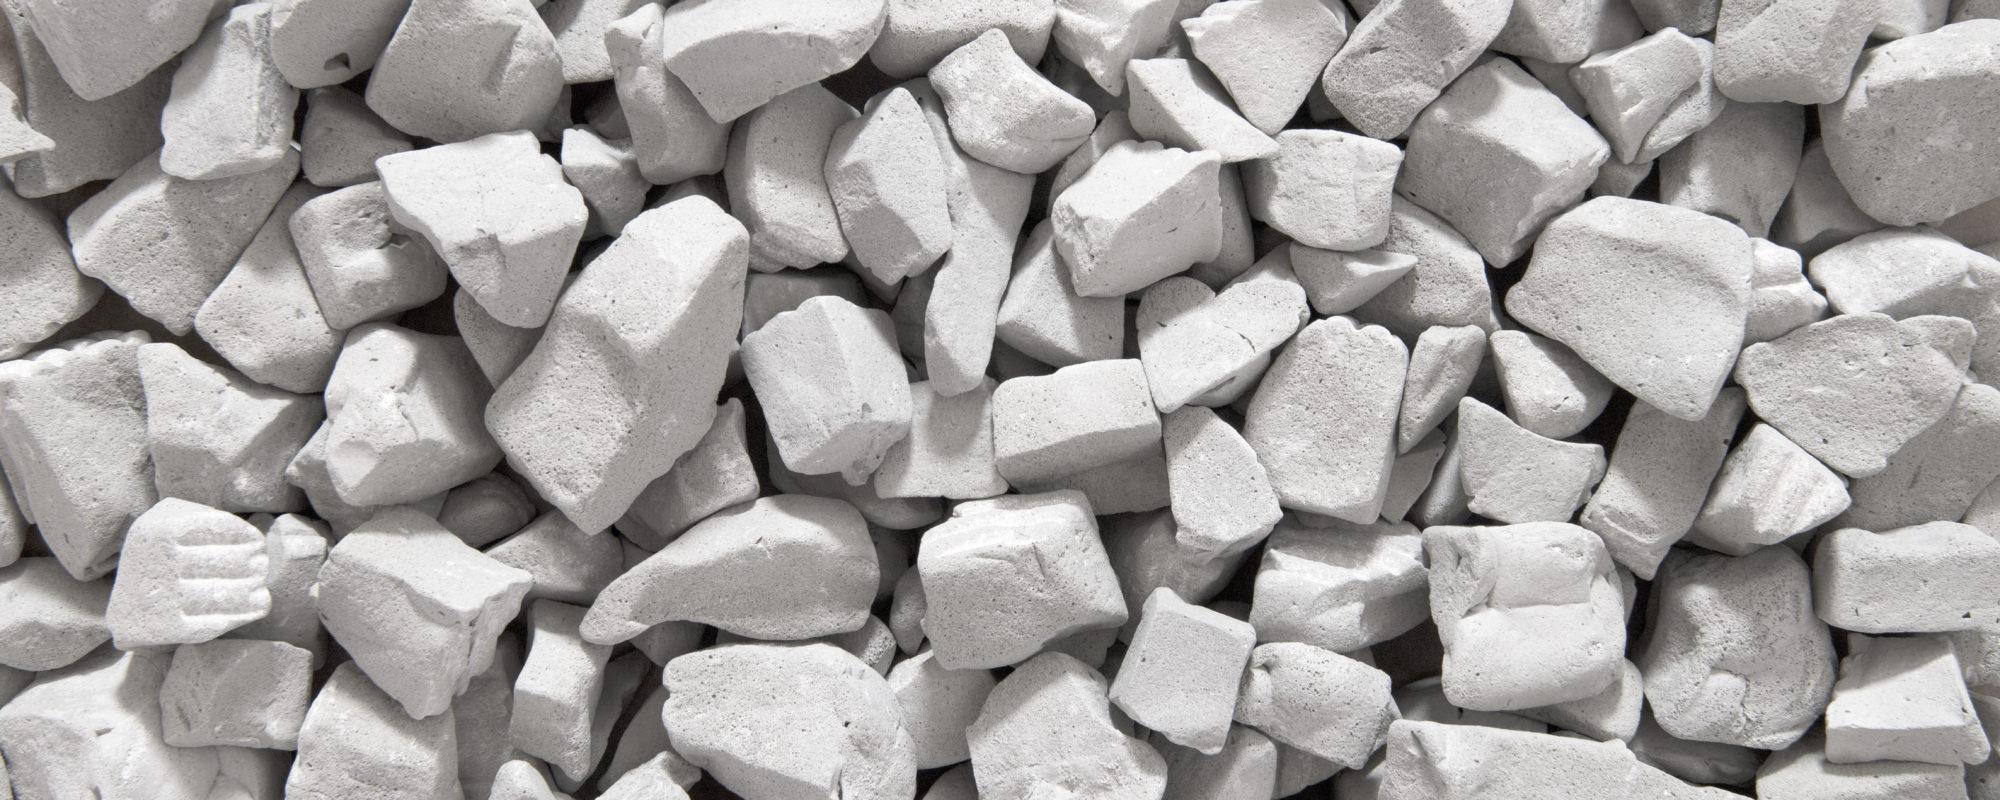 Foamit Foam Glass Aggregate Is A Versatile Recycled Material Foamit